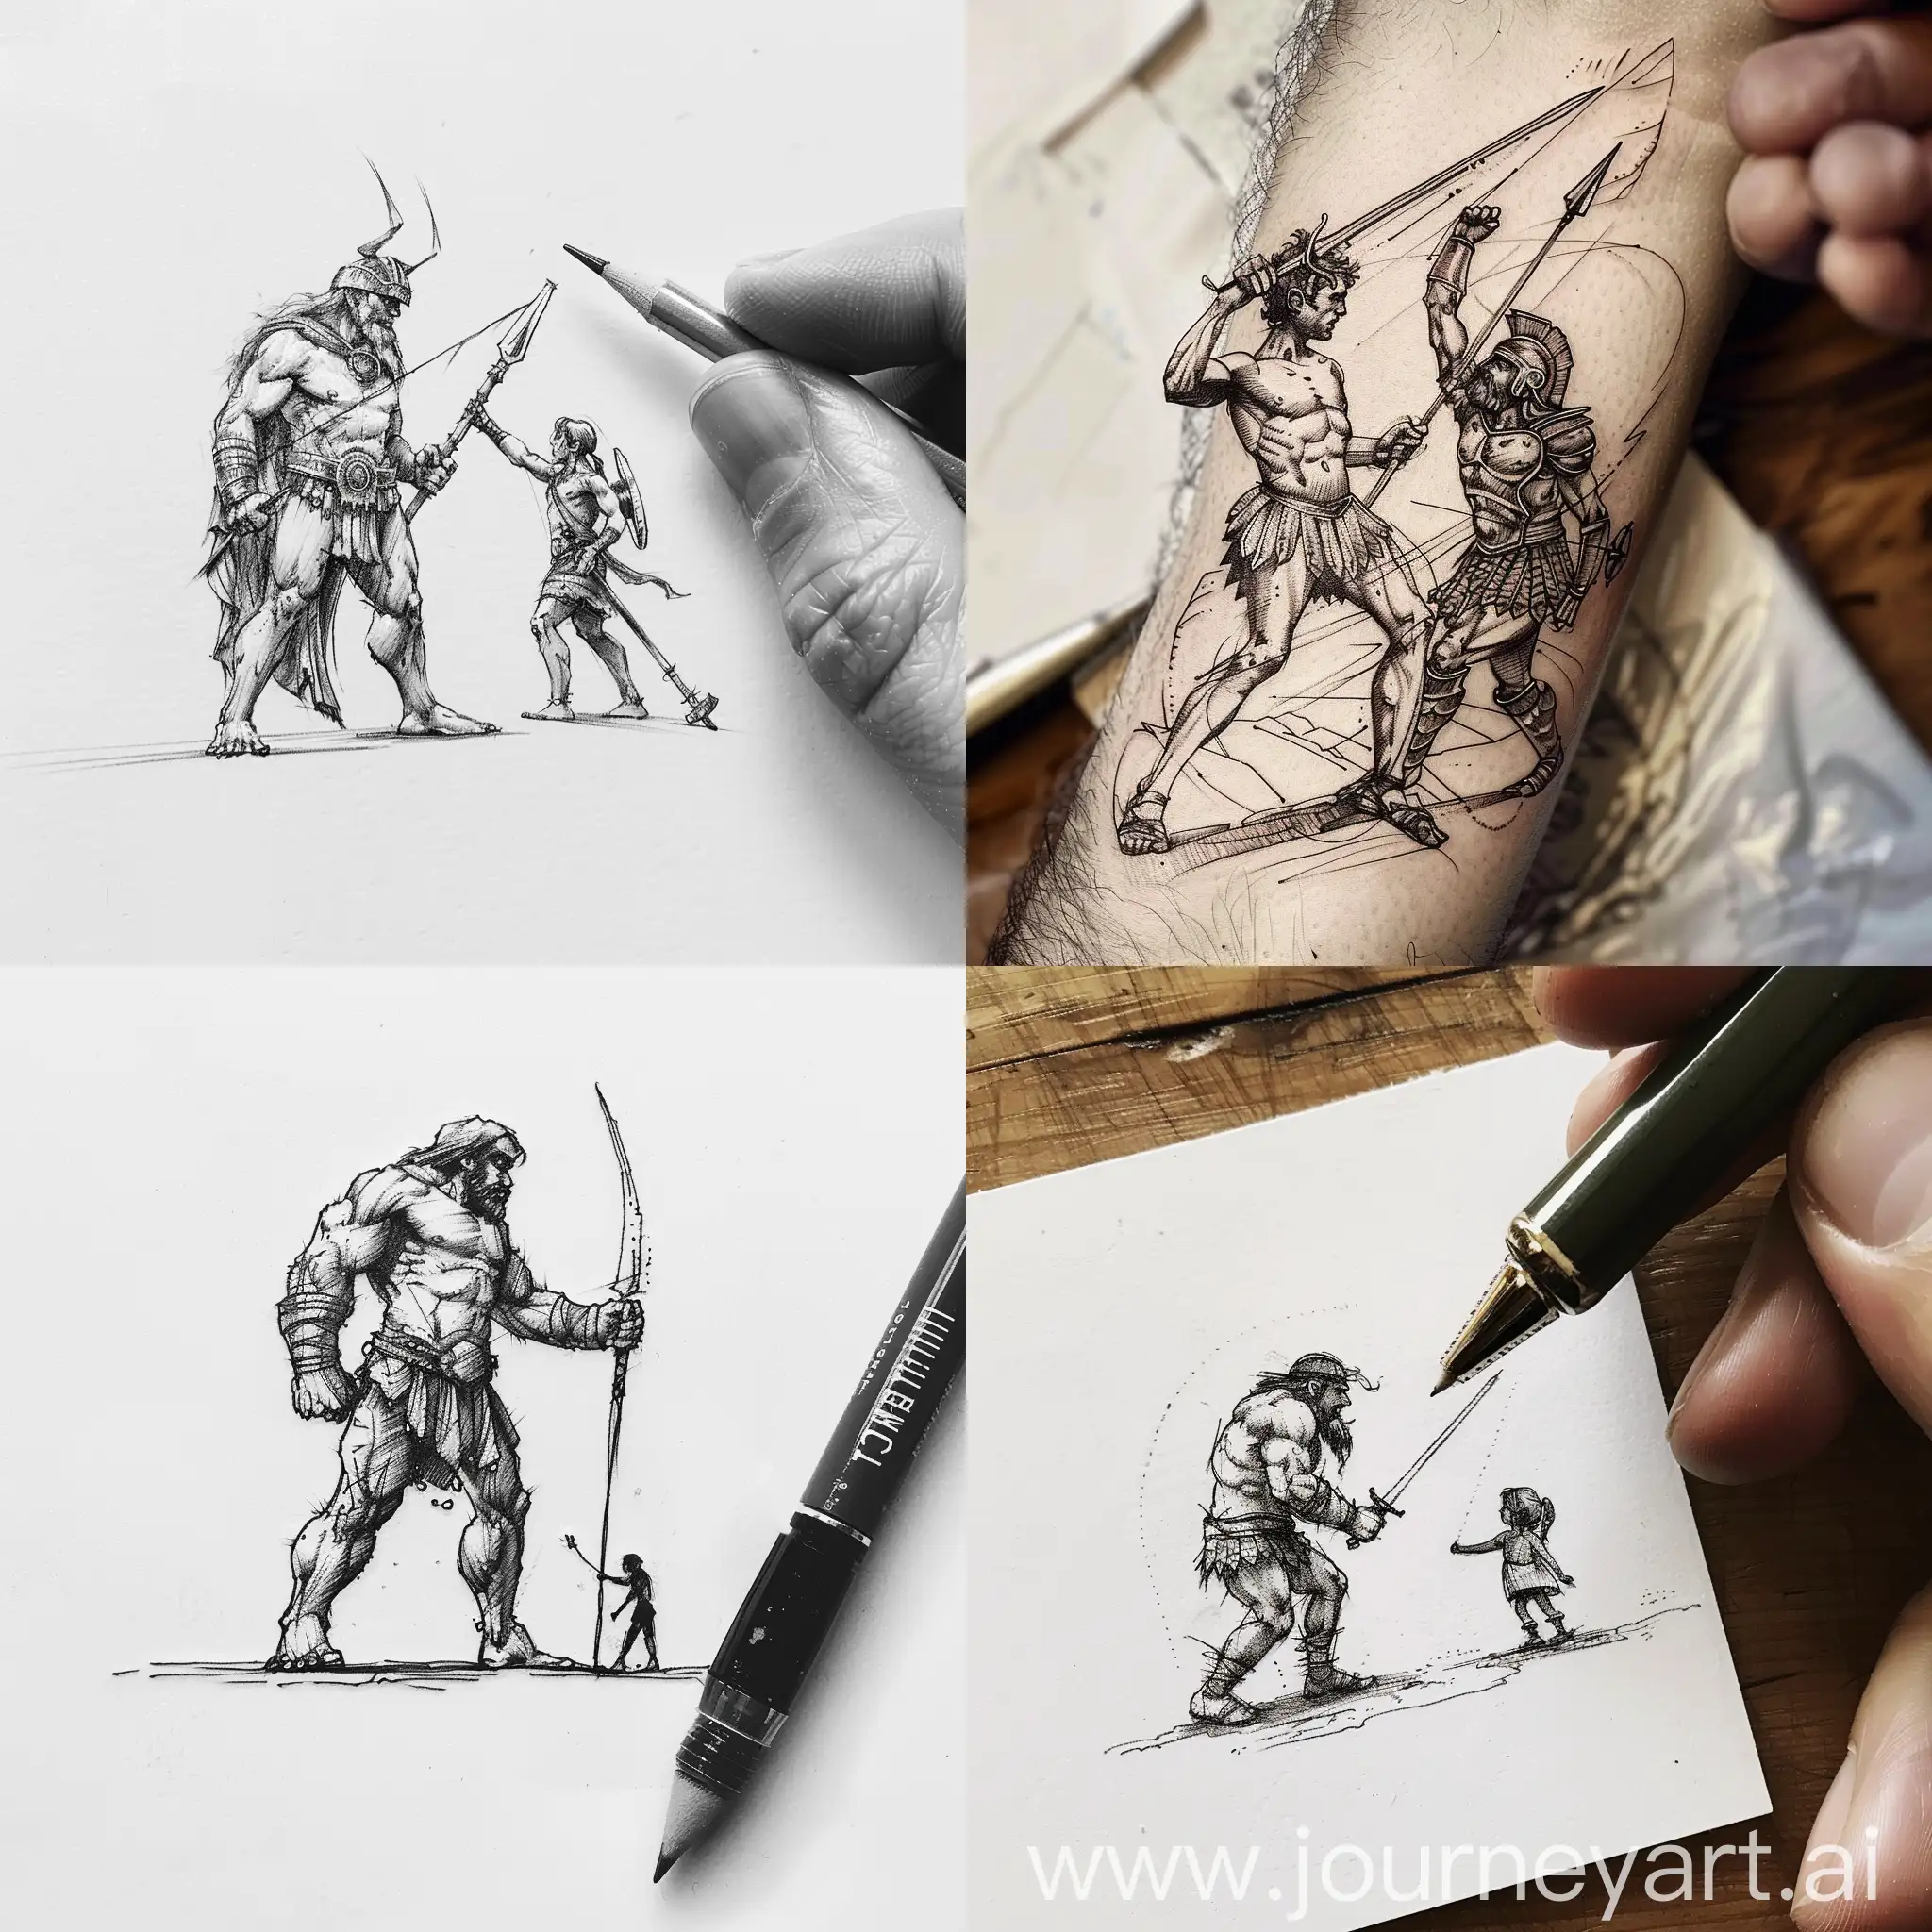 David-and-Goliath-Inspired-Small-Tattoo-Sketch